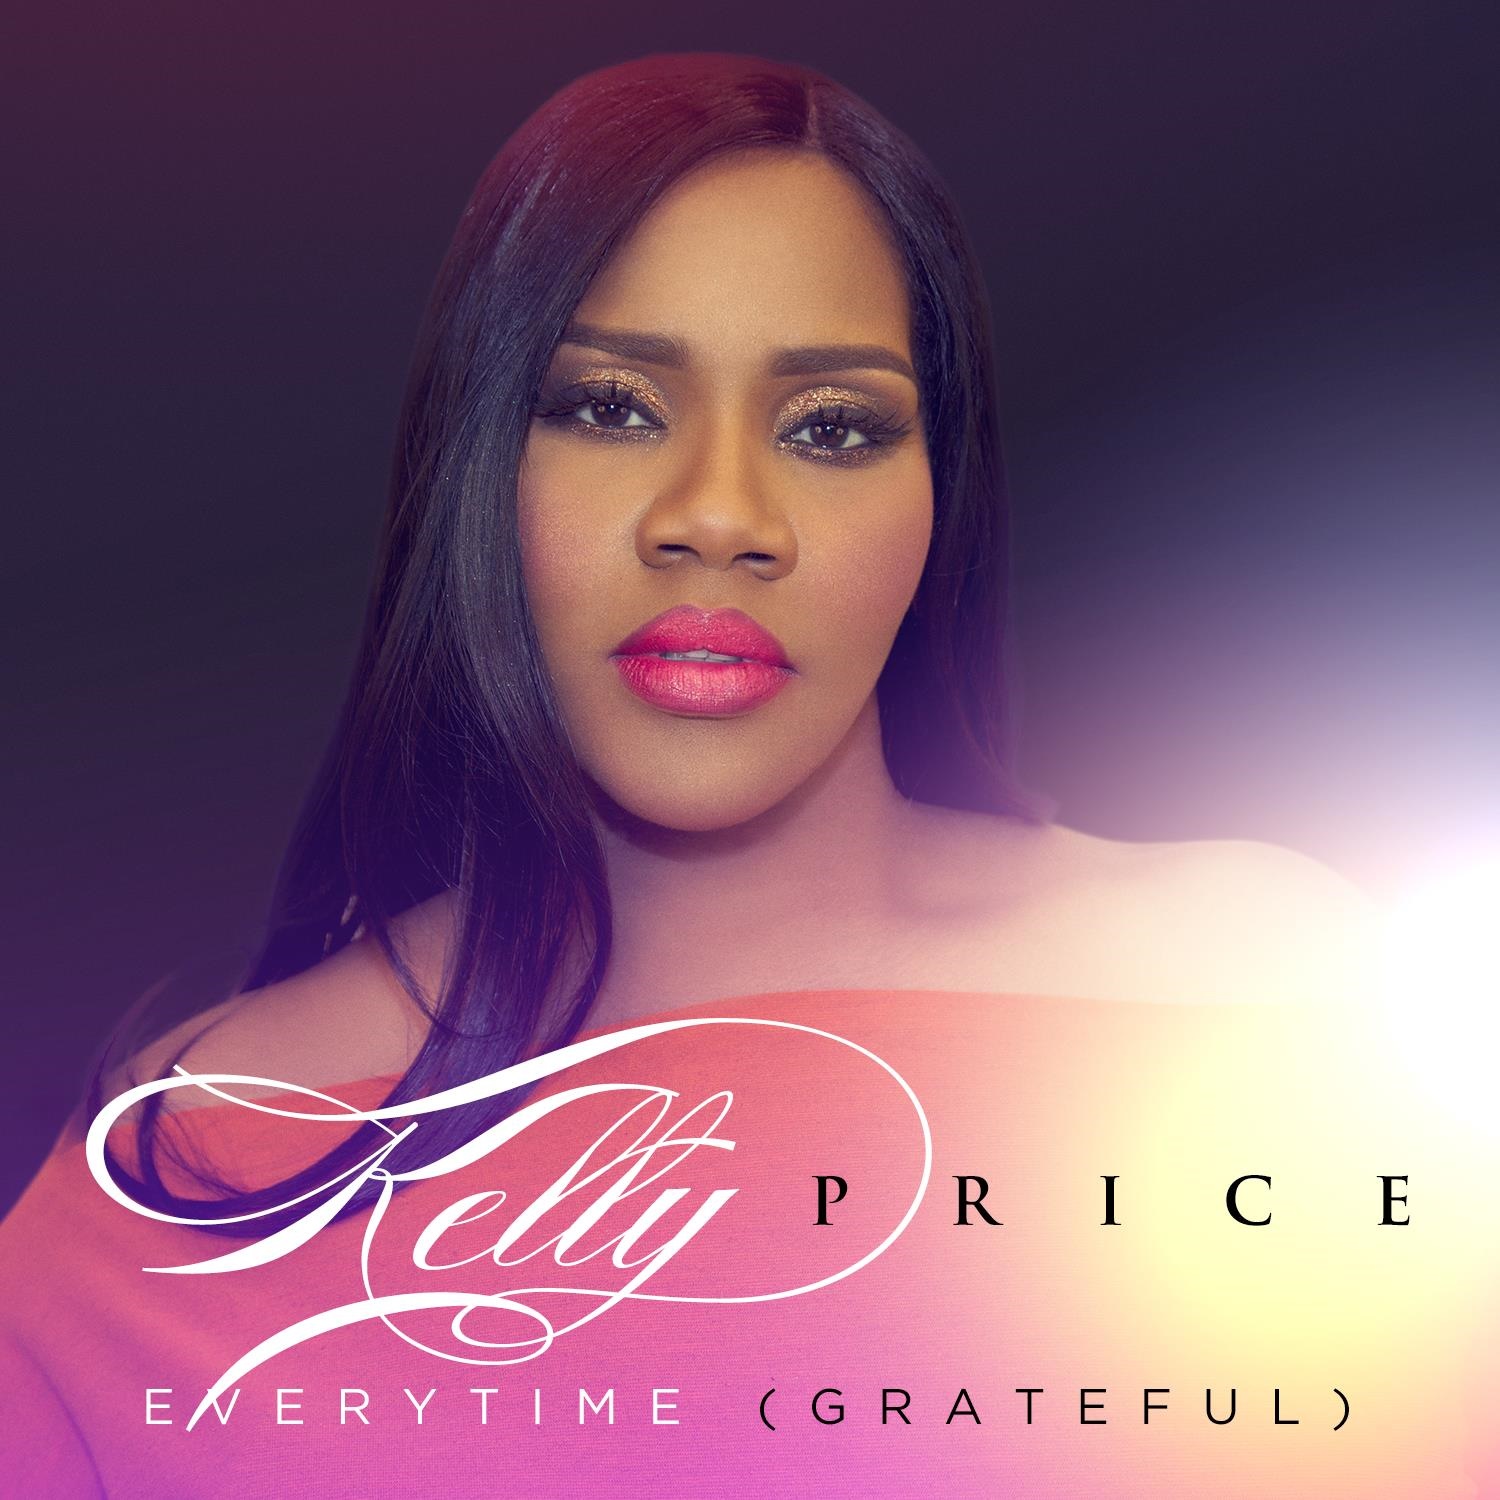 Kelly Price Every Time Grateful